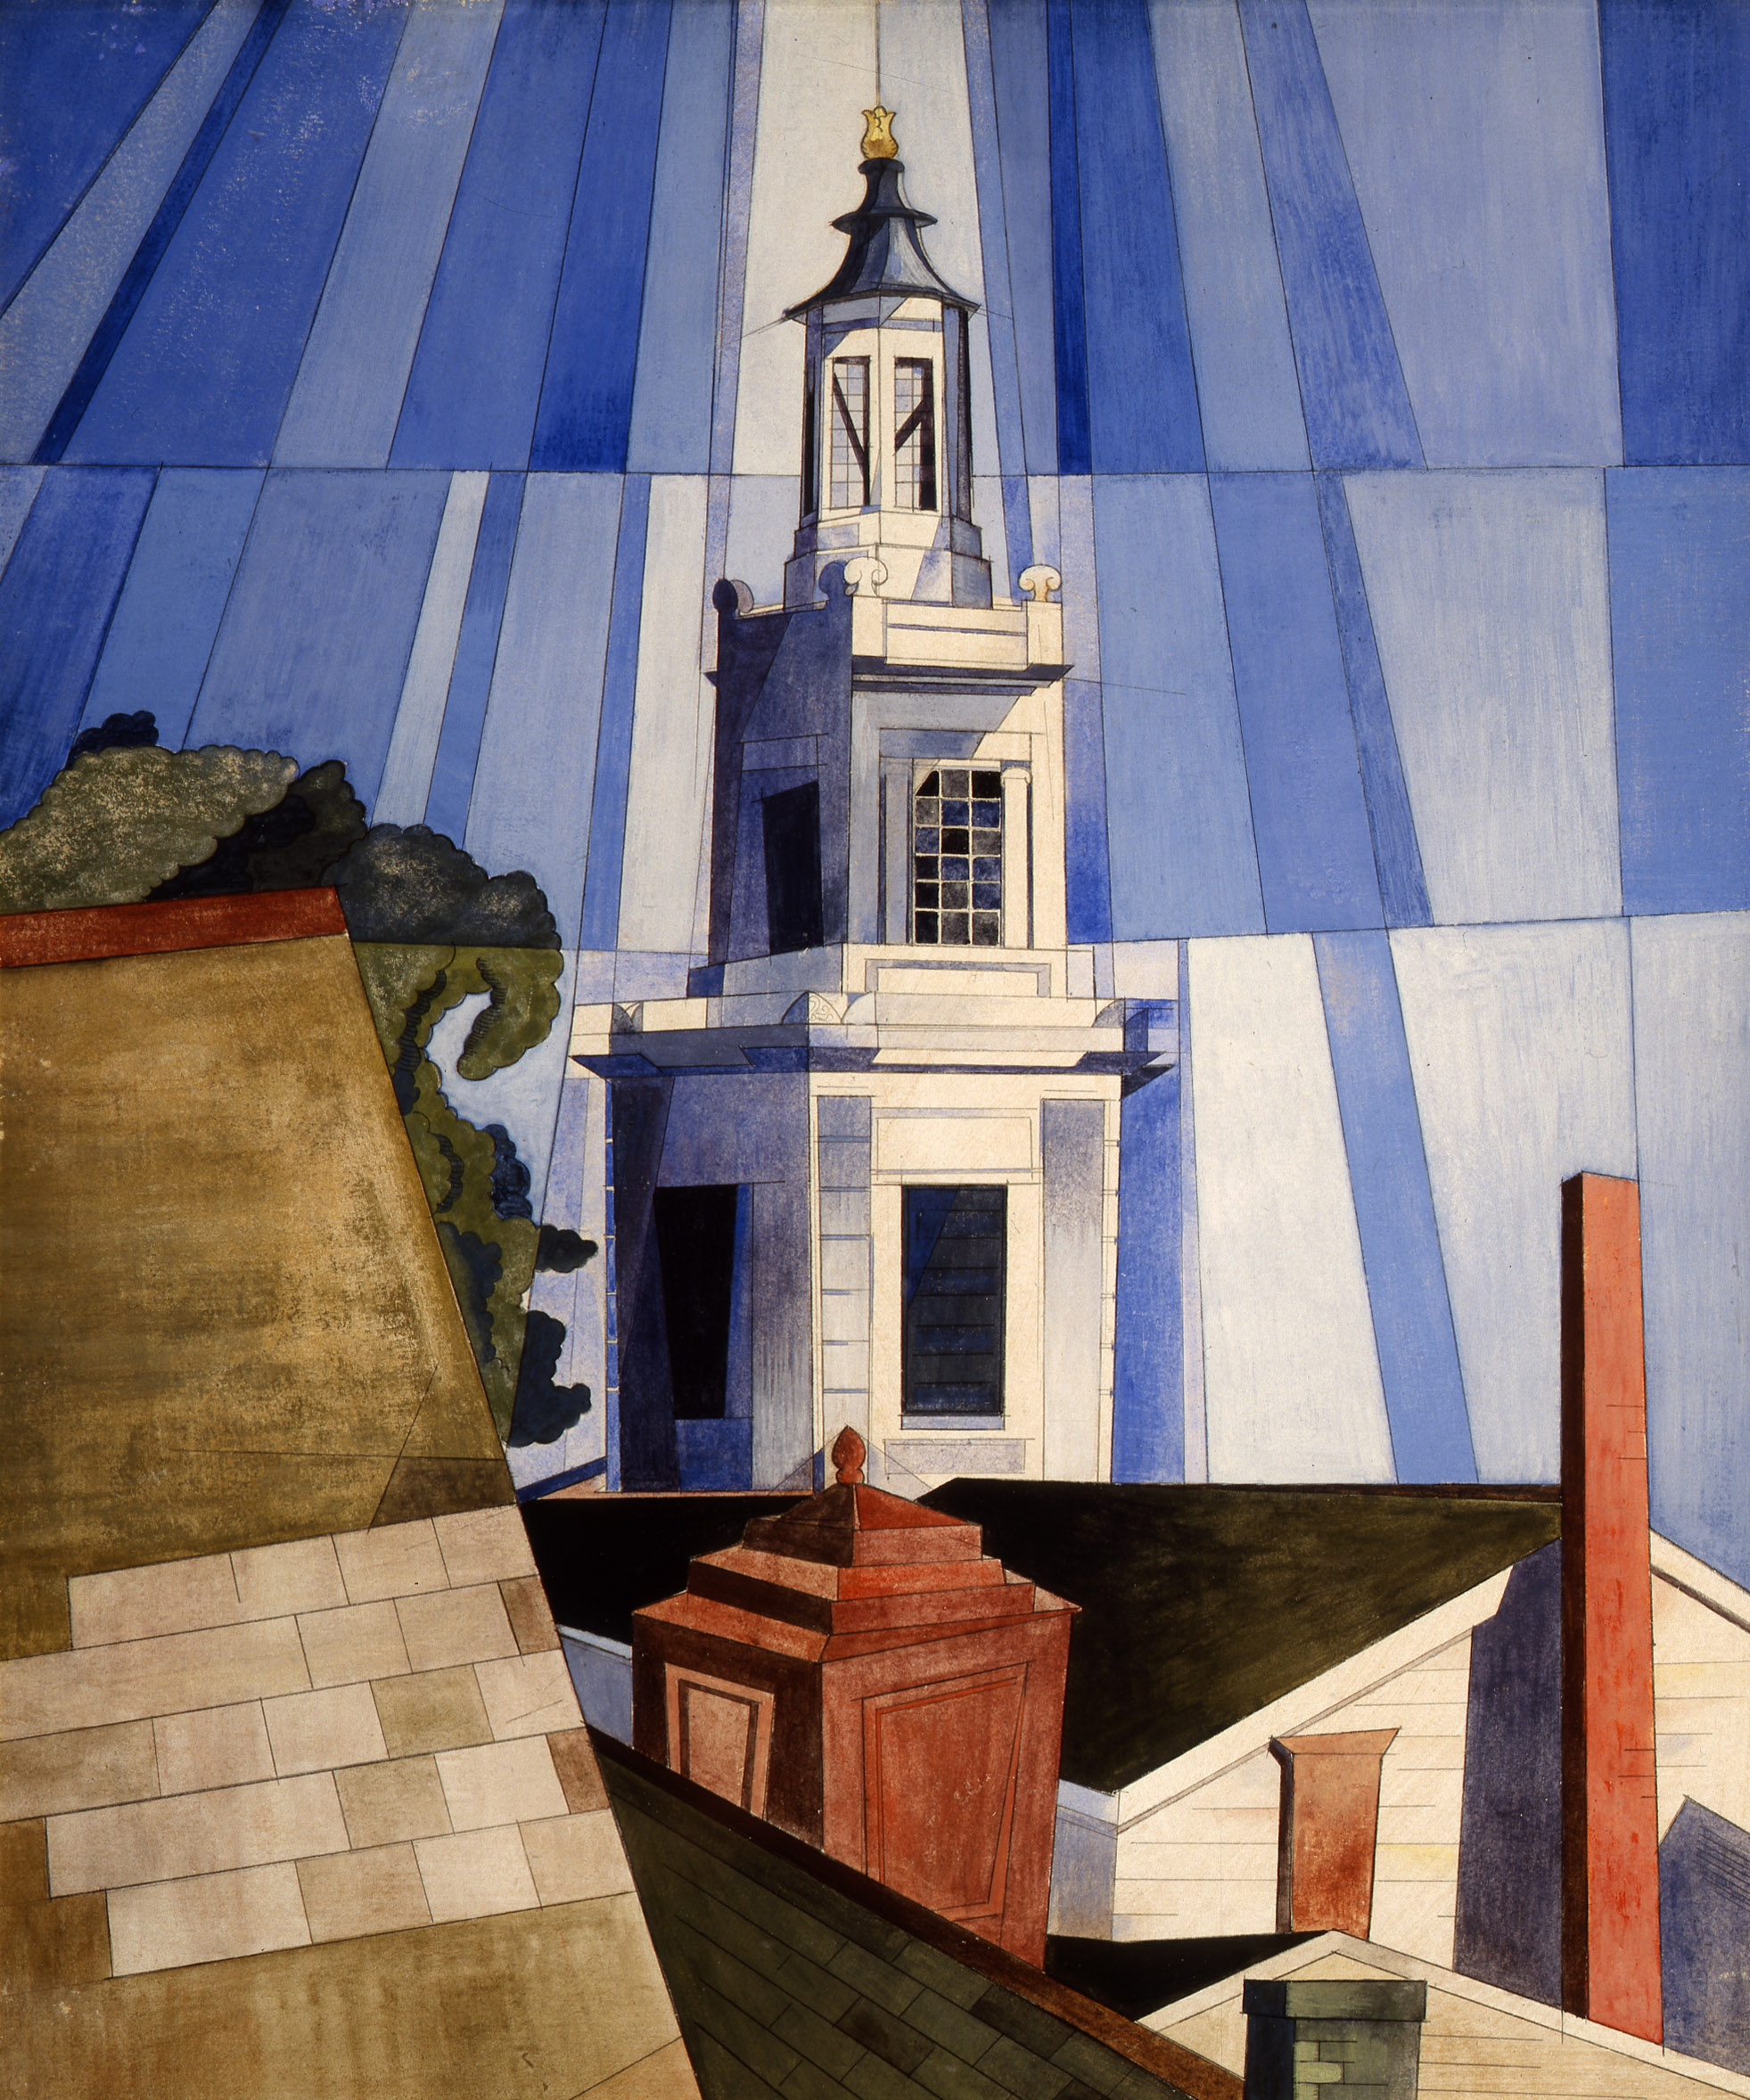 File:The Tower by Charles Demuth, Columbus Museum of Art.jpg